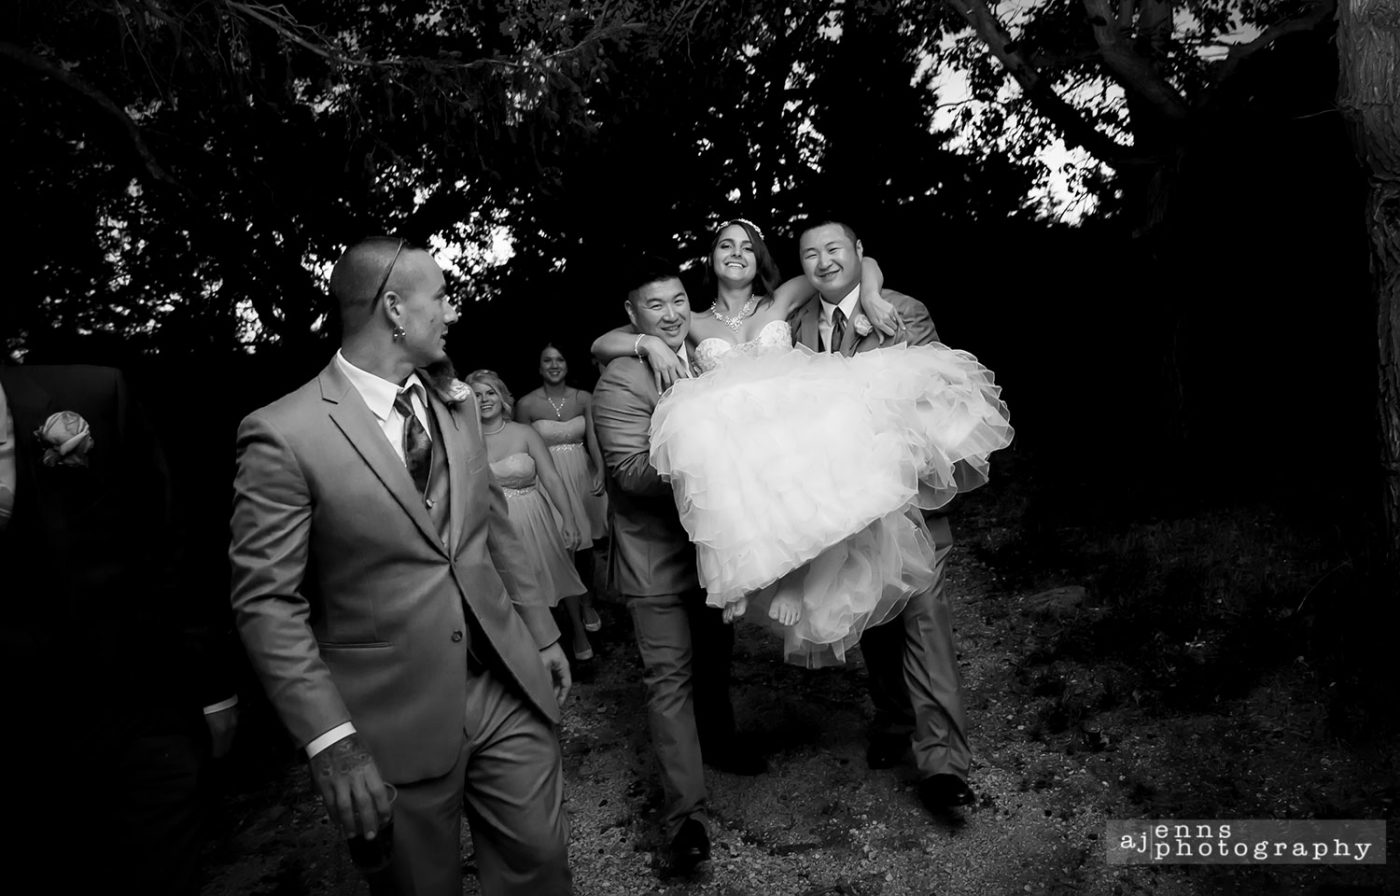 Felicia being carried by her groomsmen over some mud in her wedding dress